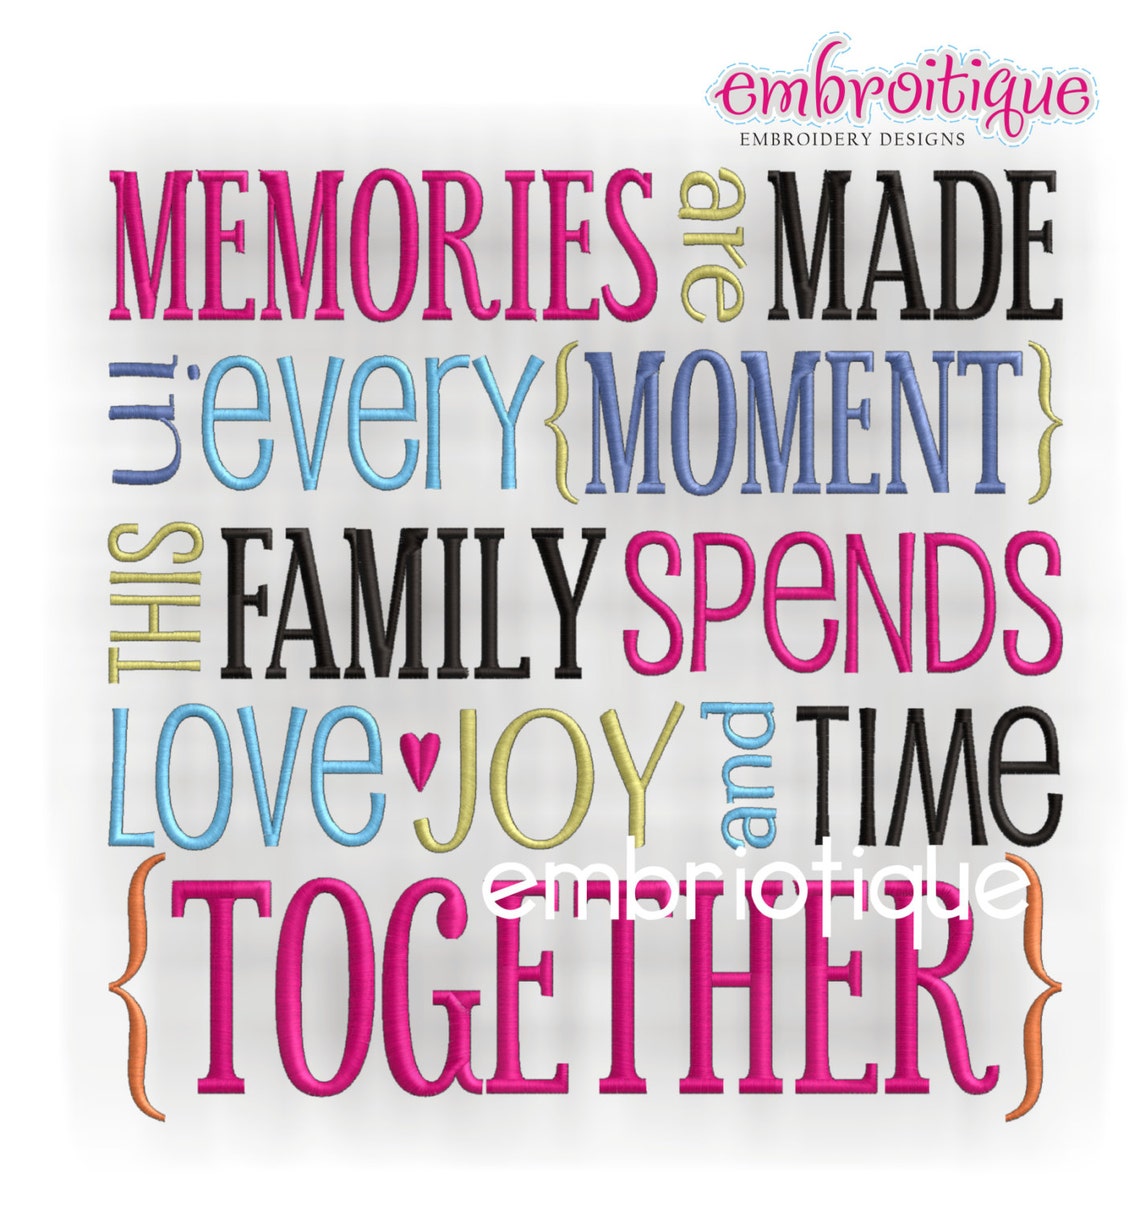 Memories Are Made of Every Moment This Family Spends Together - Etsy